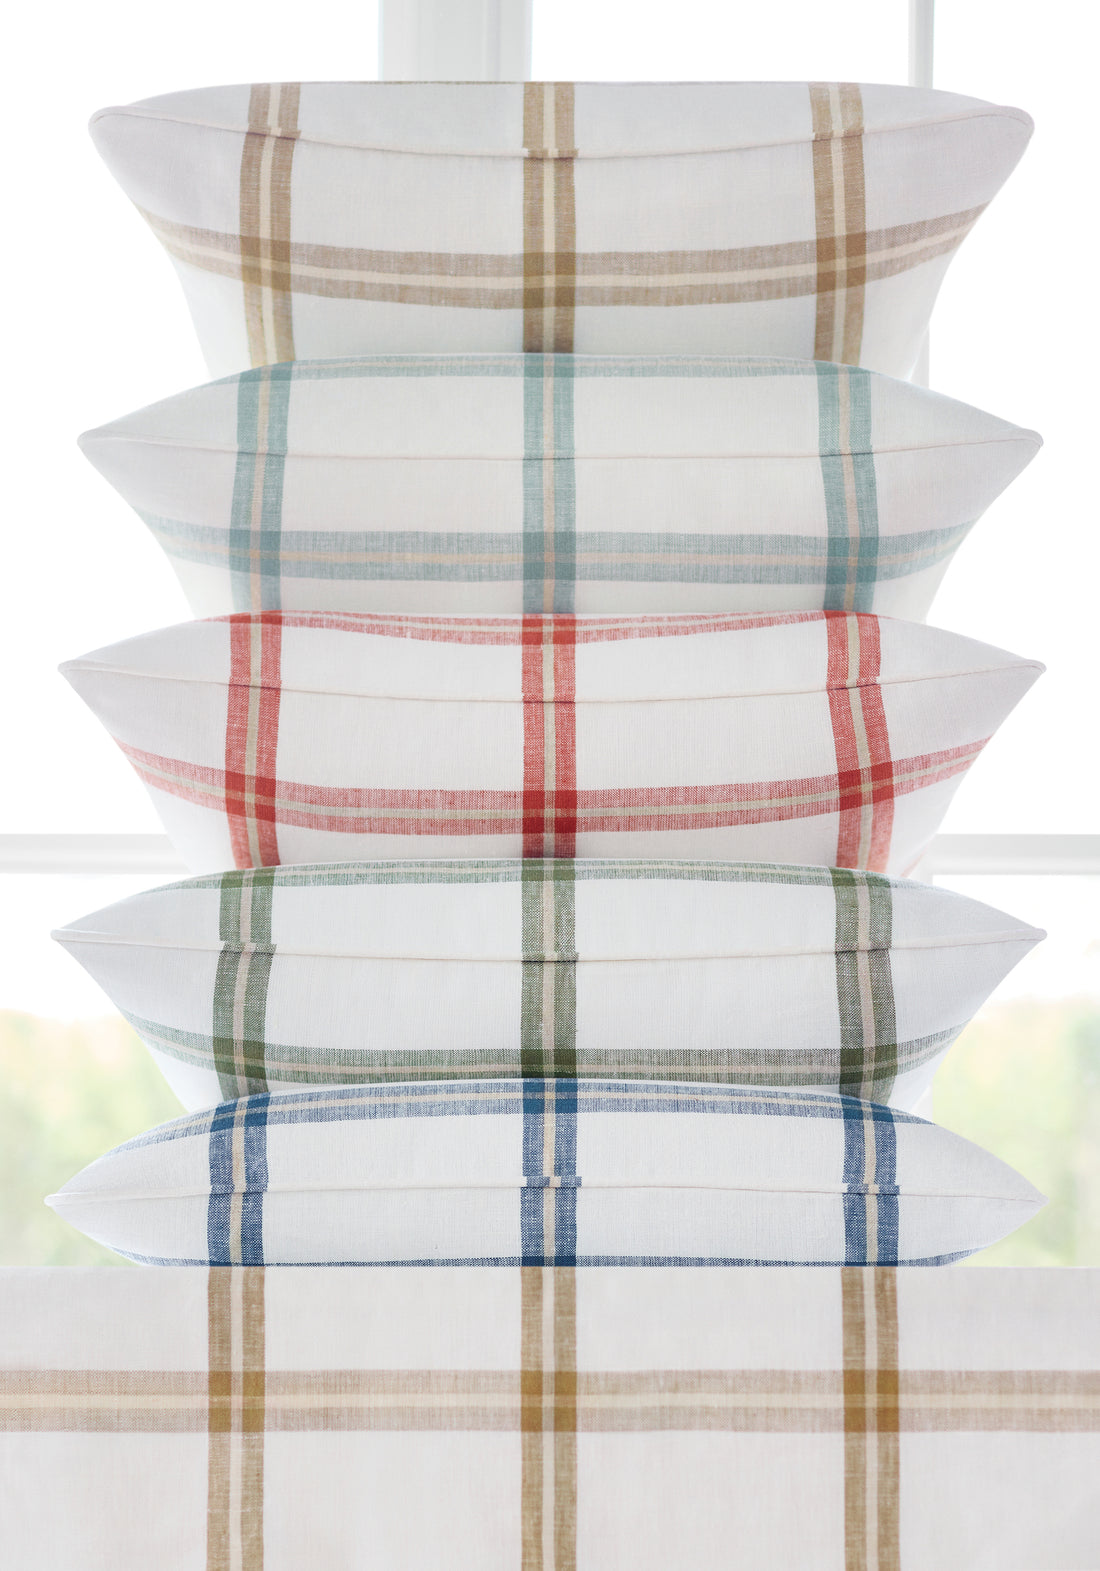 Pillows featuring Huntington Plaid fabric in spruce color - pattern number W781332 - by Thibaut in the Montecito collection